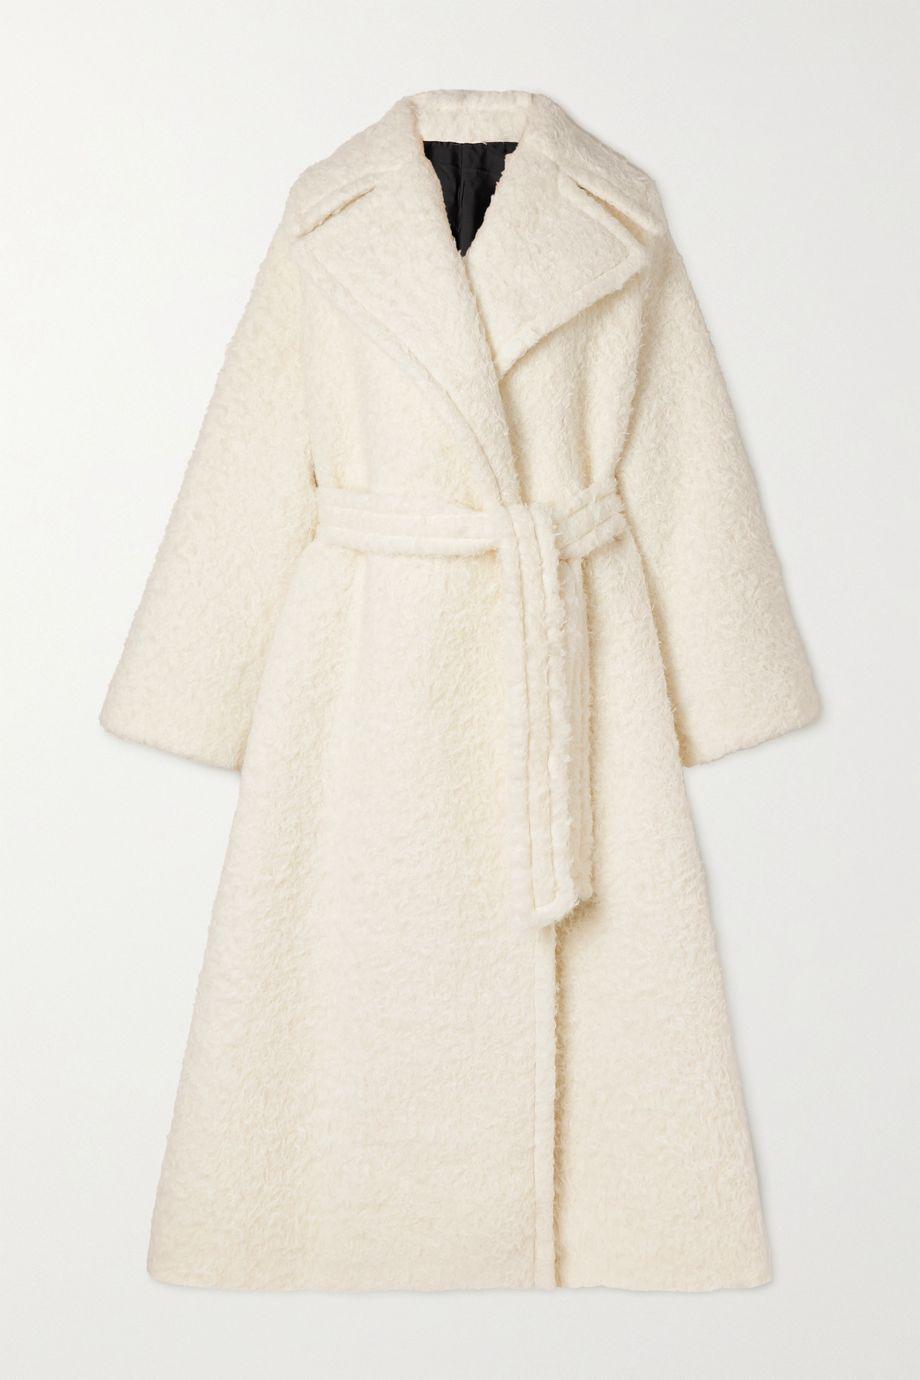 Belted alpaca and cotton-blend coat by ALAIA